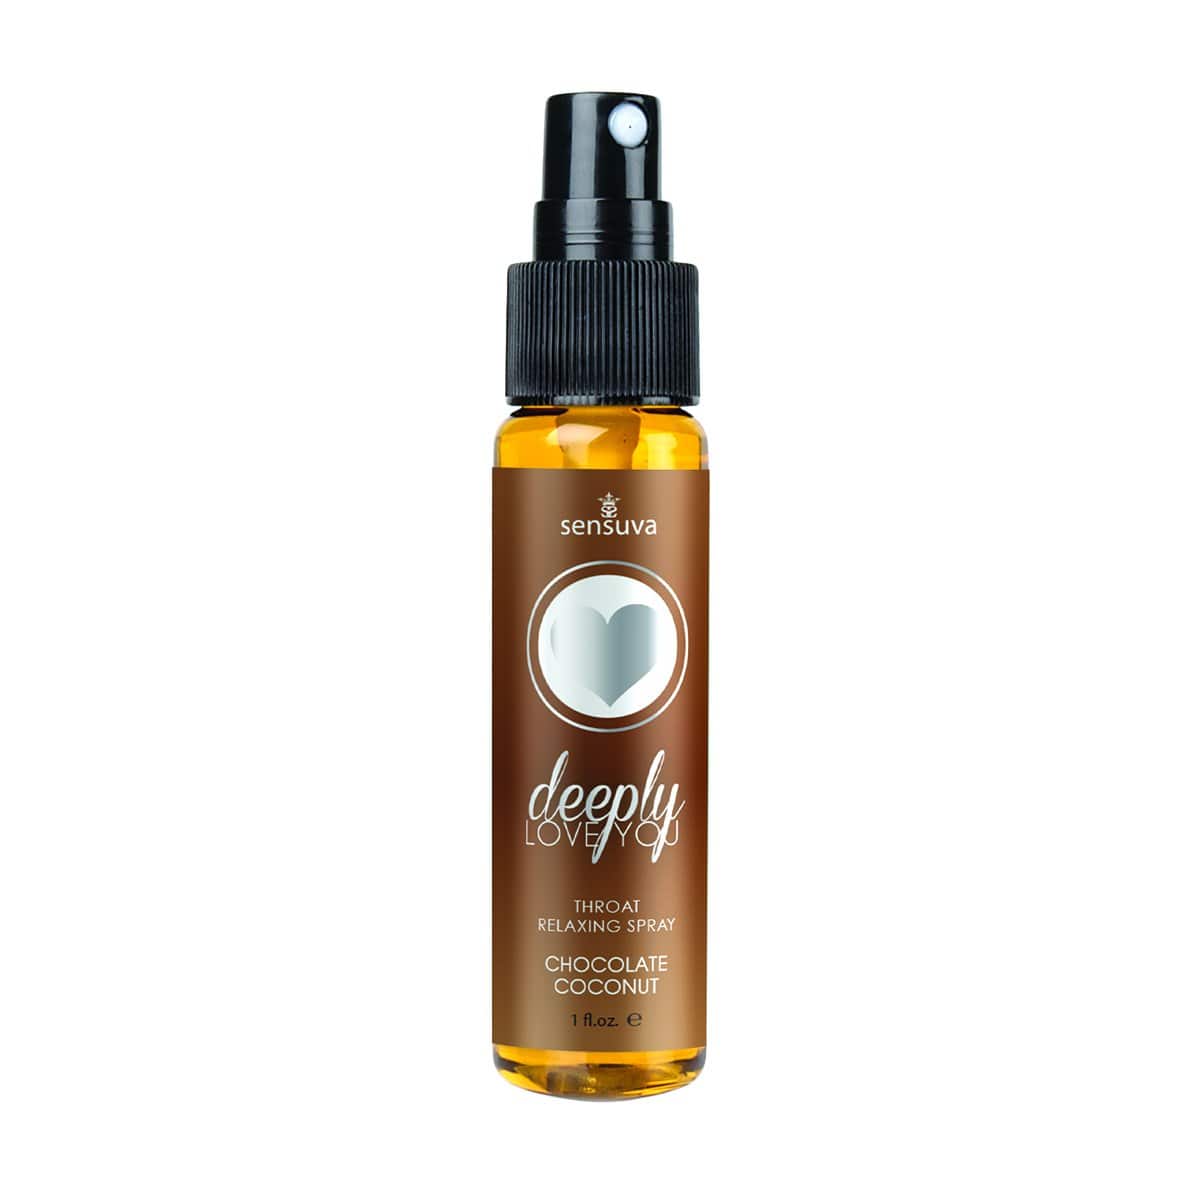 deeply love you throat relaxing spray chocolate coconut 1 fl oz